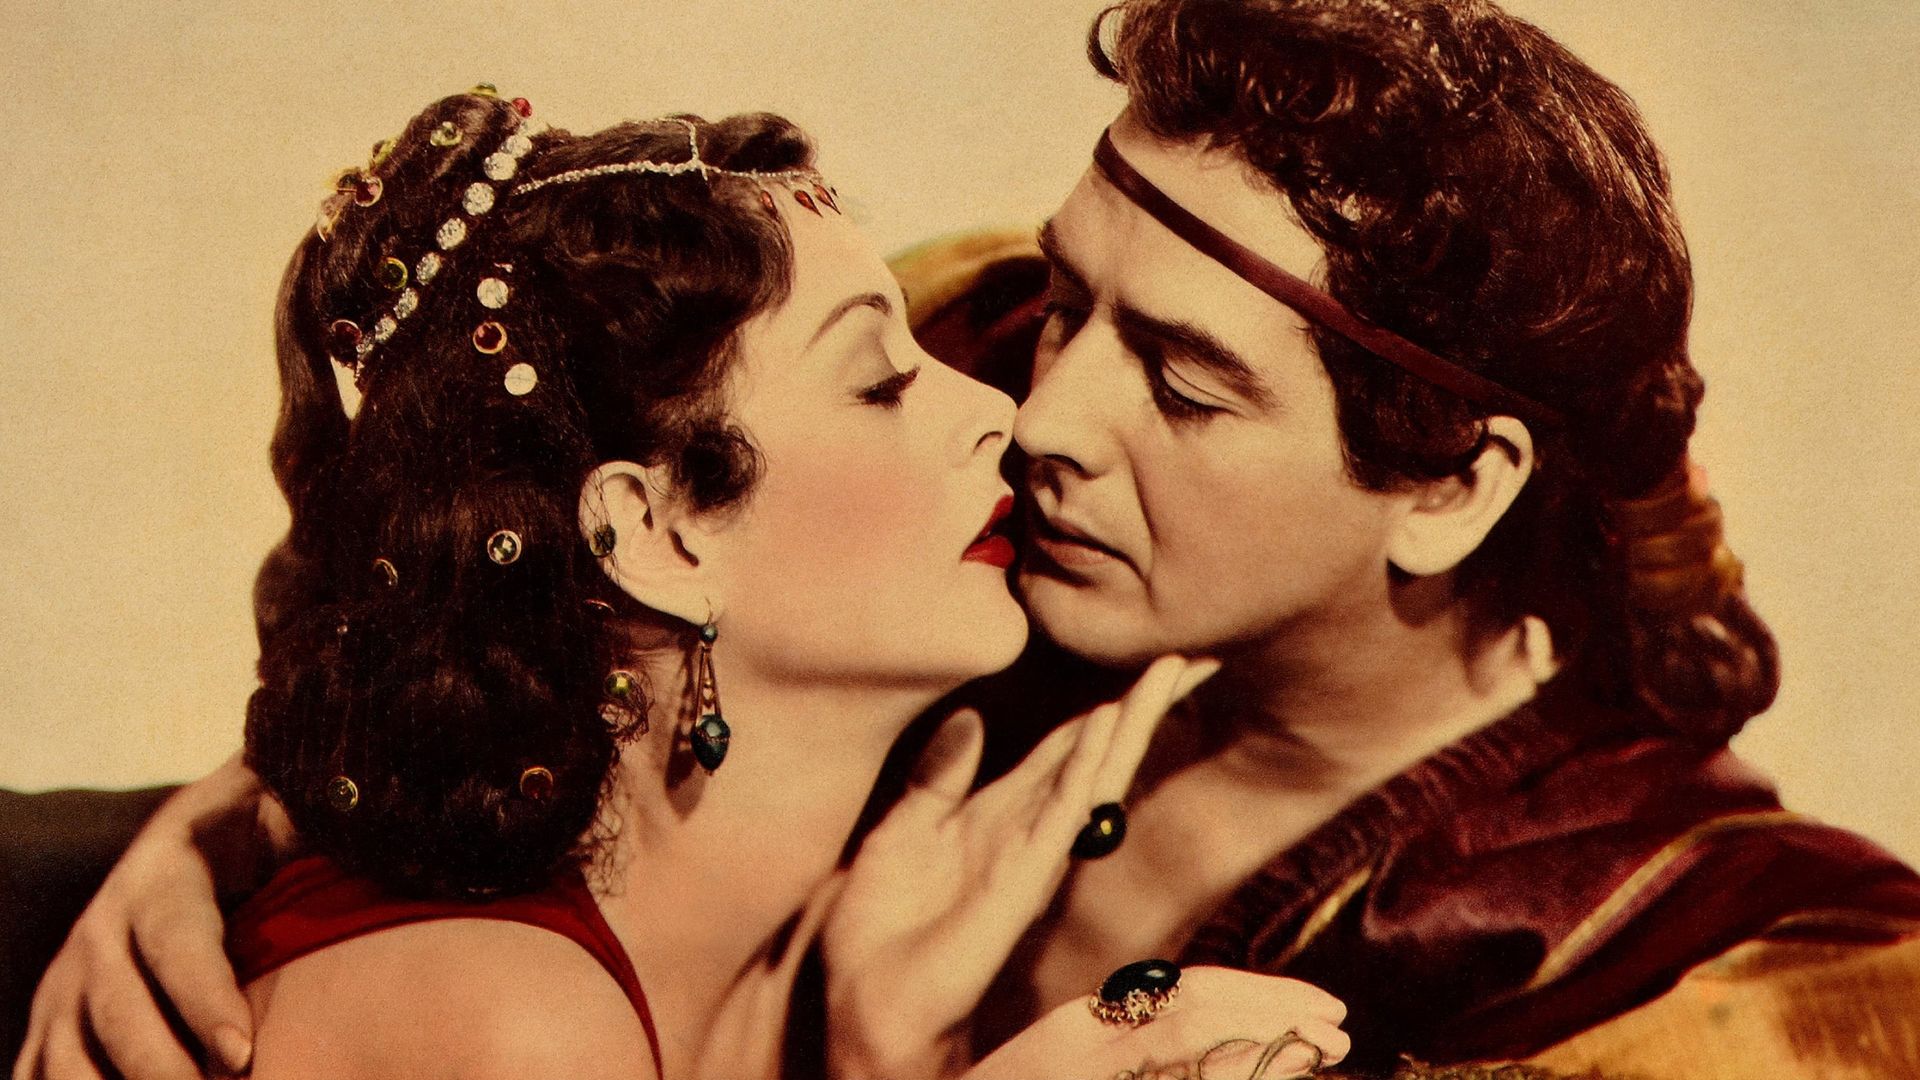 watch samson and delilah online